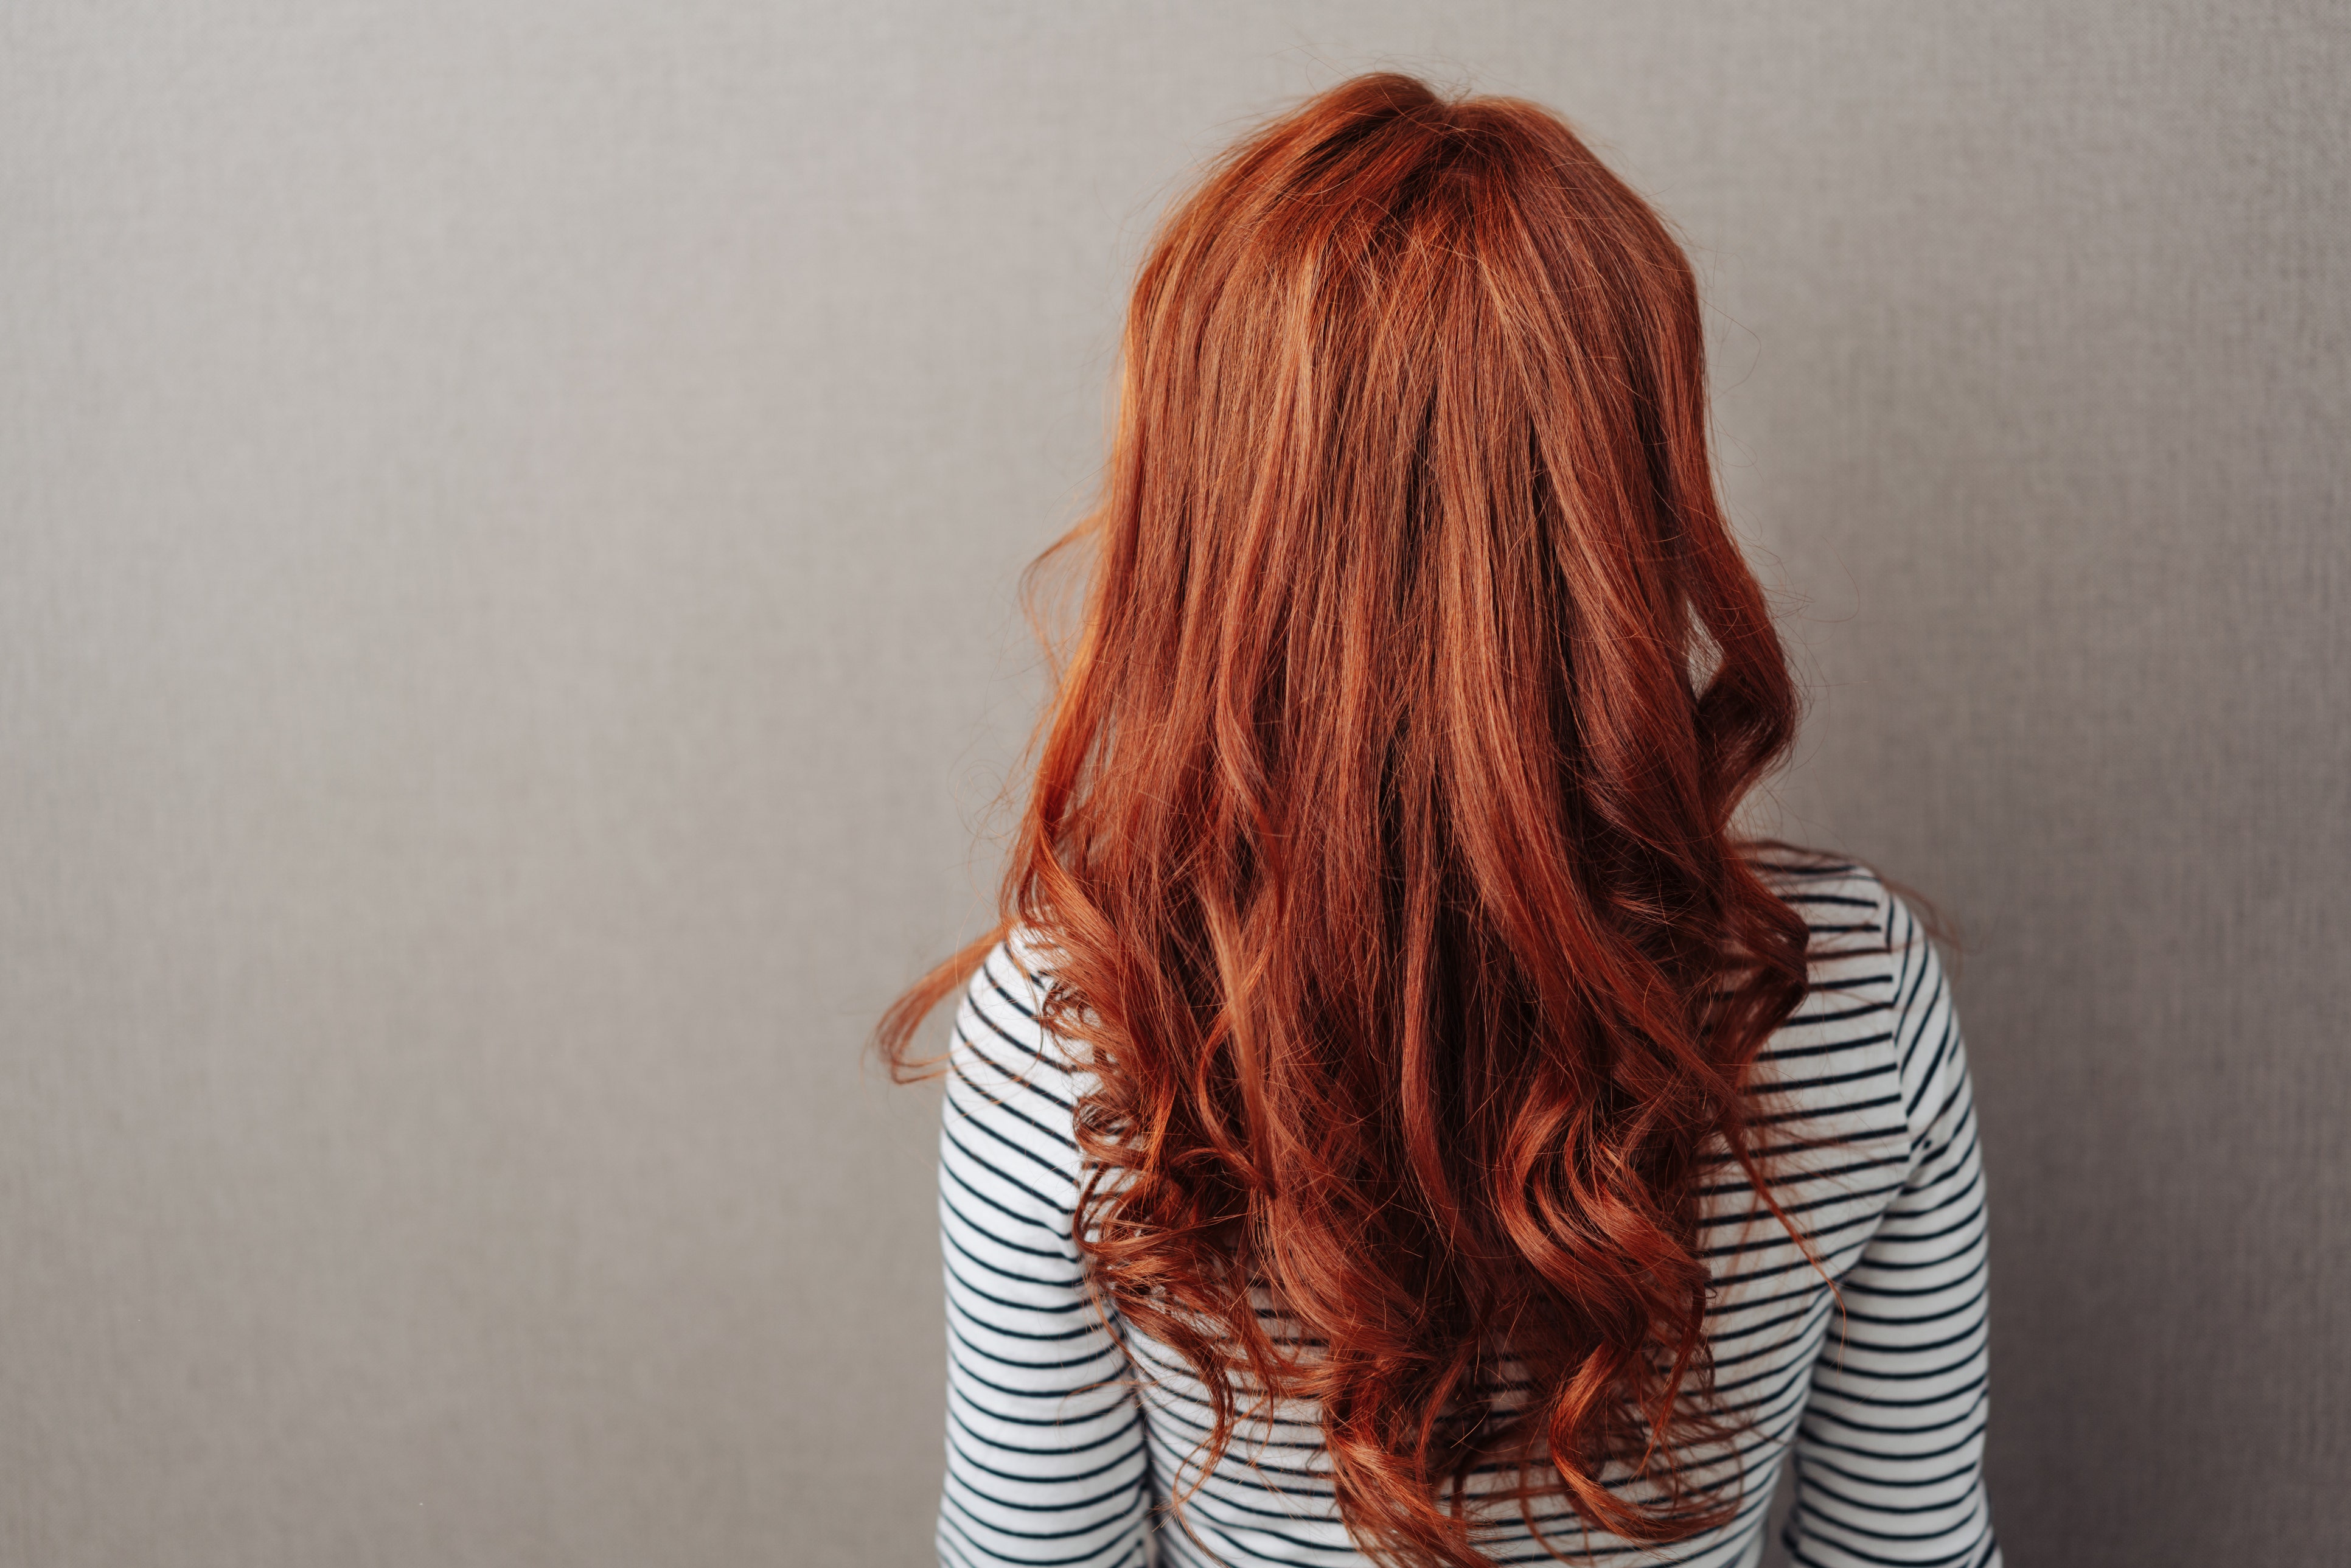 Why redheads feel less pain, according to scientists 